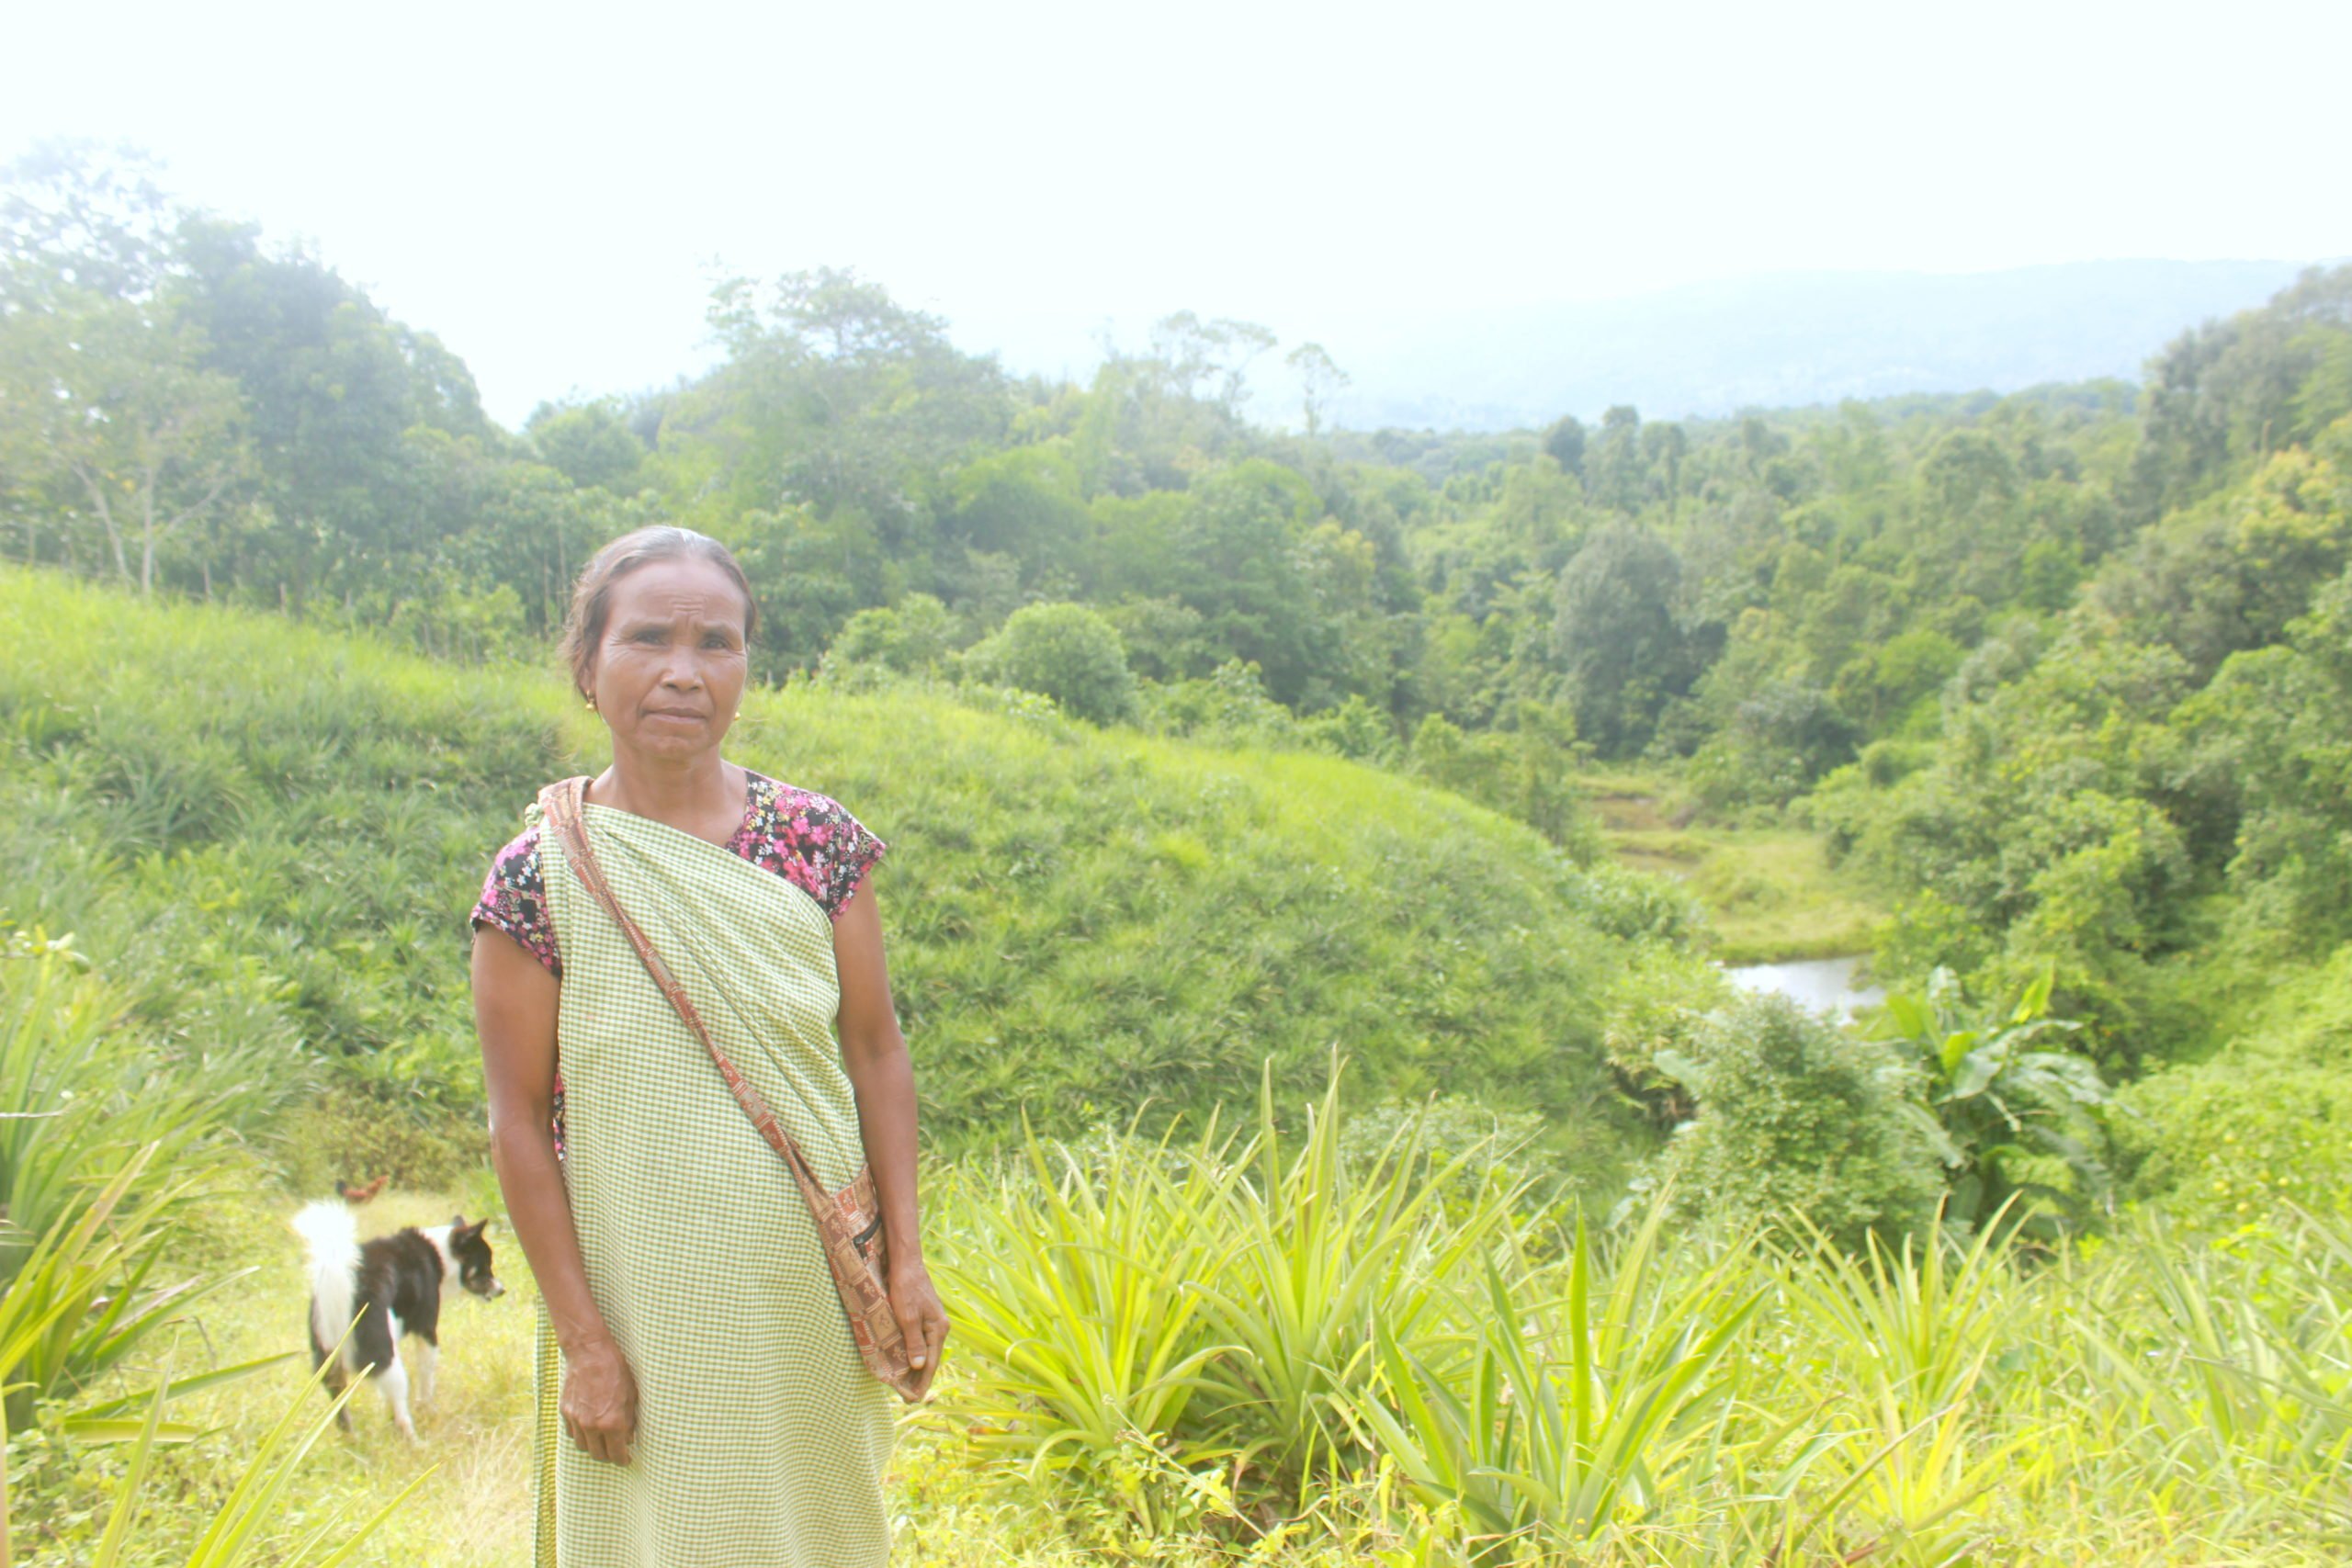 Thrias Makroh cultivates pineapples at her land on the slope of a hill. (Image: Varsha Torgalkar)